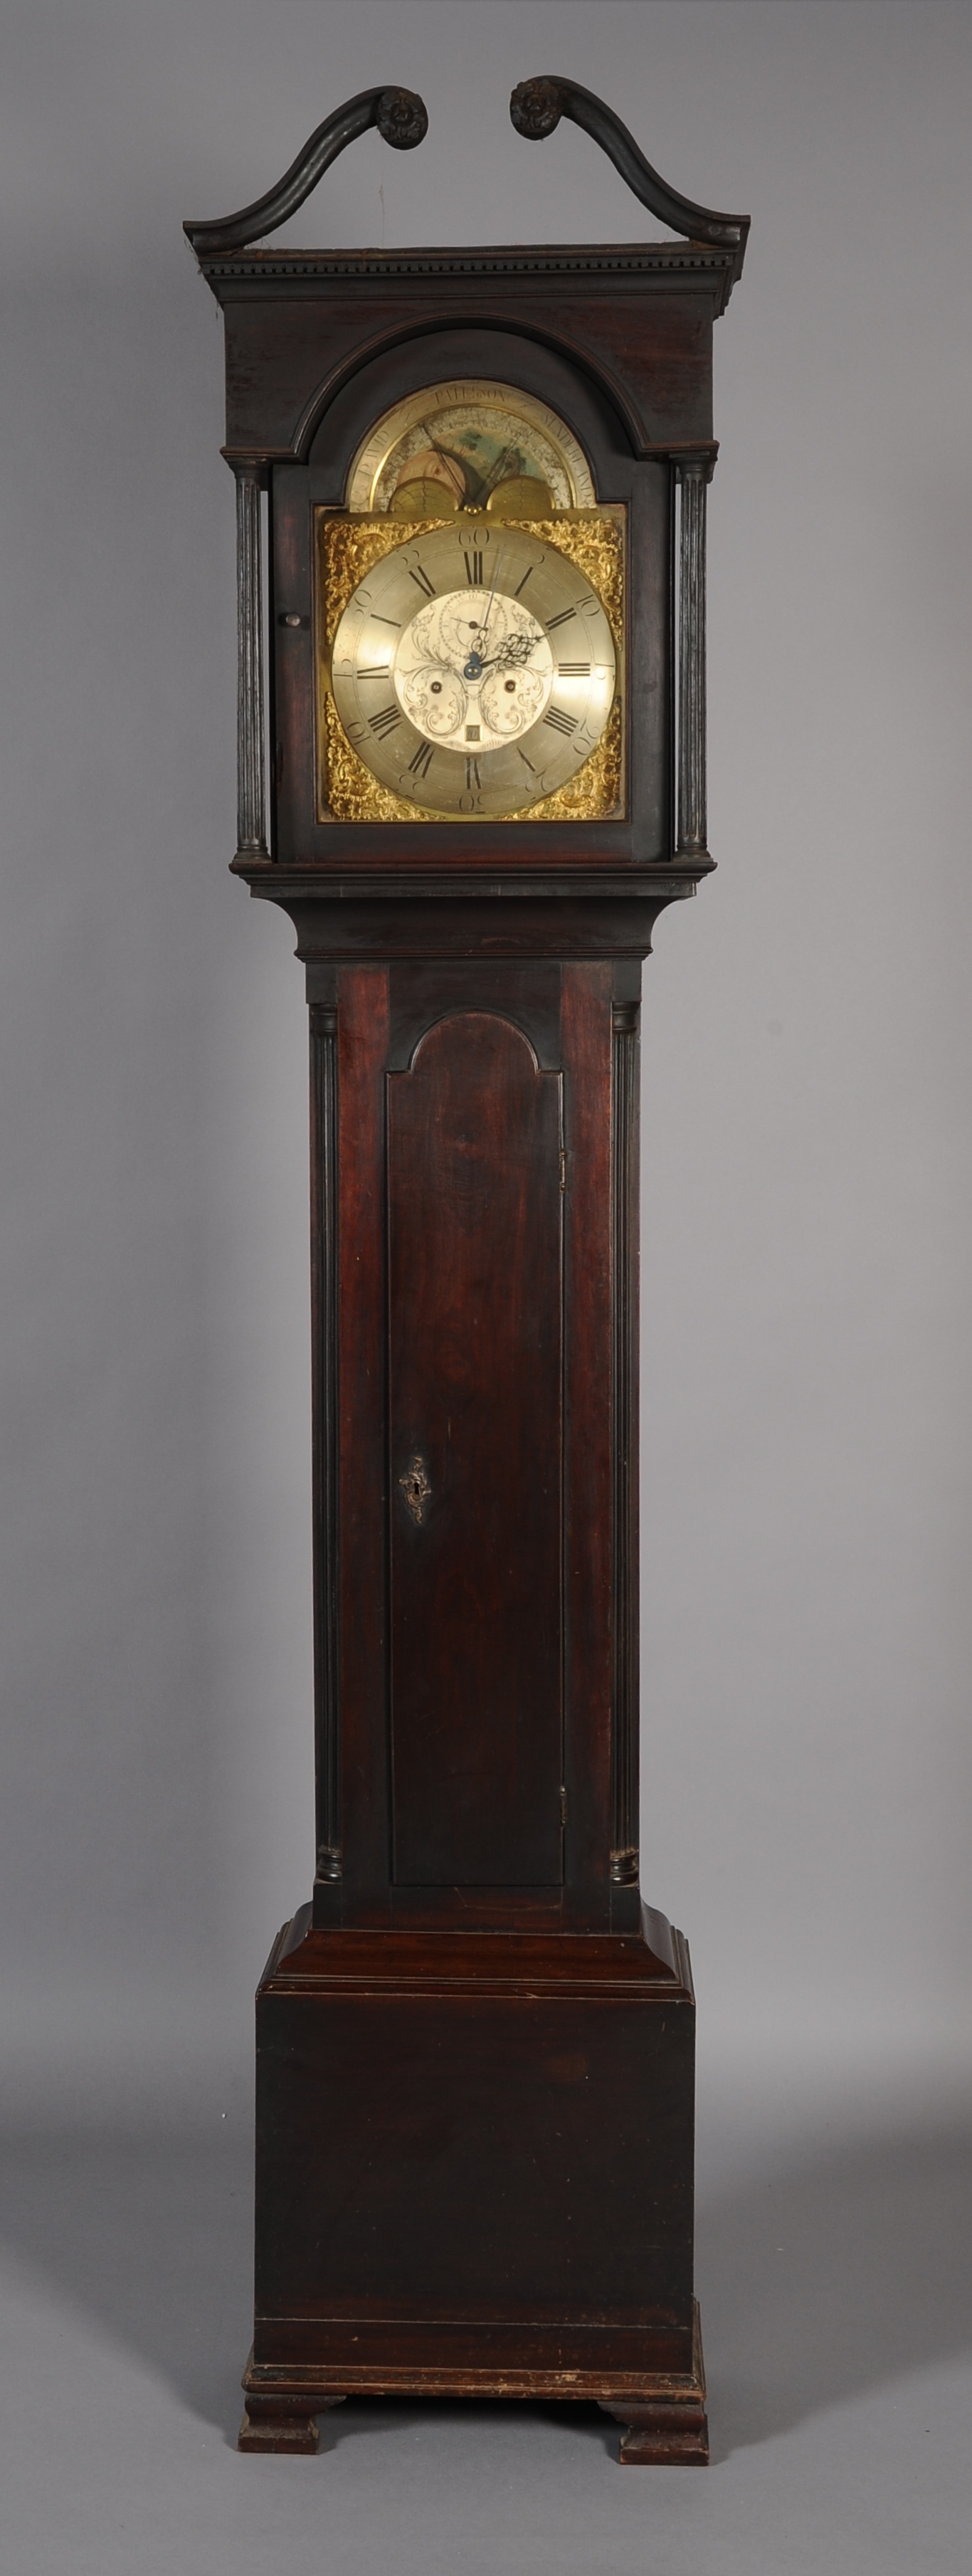 A GEORGE III MAHOGANY LONGCASE CLOCK, BY DAVID PATERSON, Sunderland, the eight day movement striking